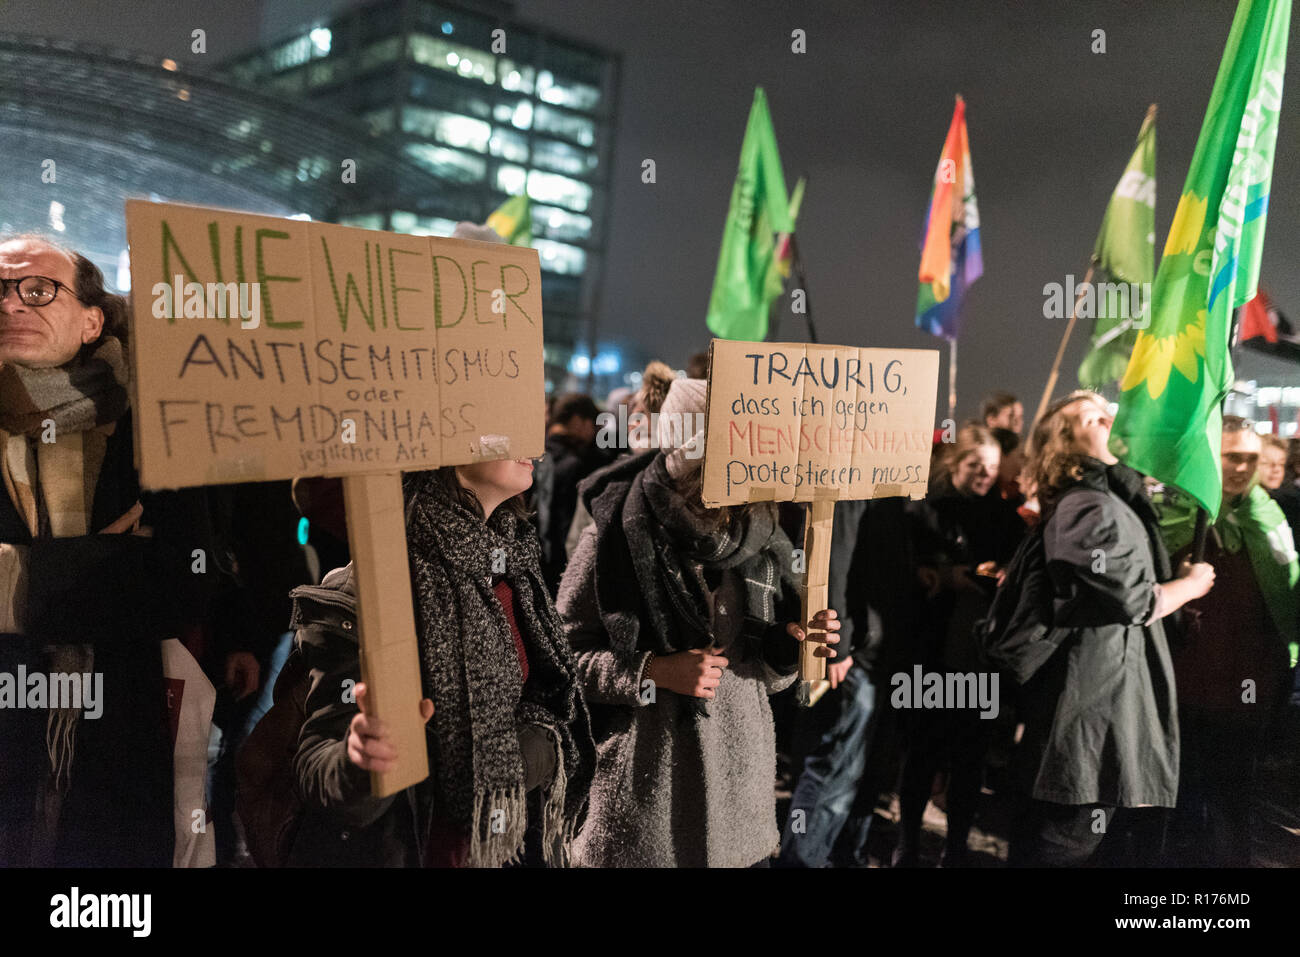 Protesters are seen holding placards during the protest. Hundreds of people have demonstrated against the funeral march of the right-wing extremist organization on the 80th anniversary of the Pogrom Night in 1938 under the motto 'Funeral March for the Dead of Politics'. Stock Photo